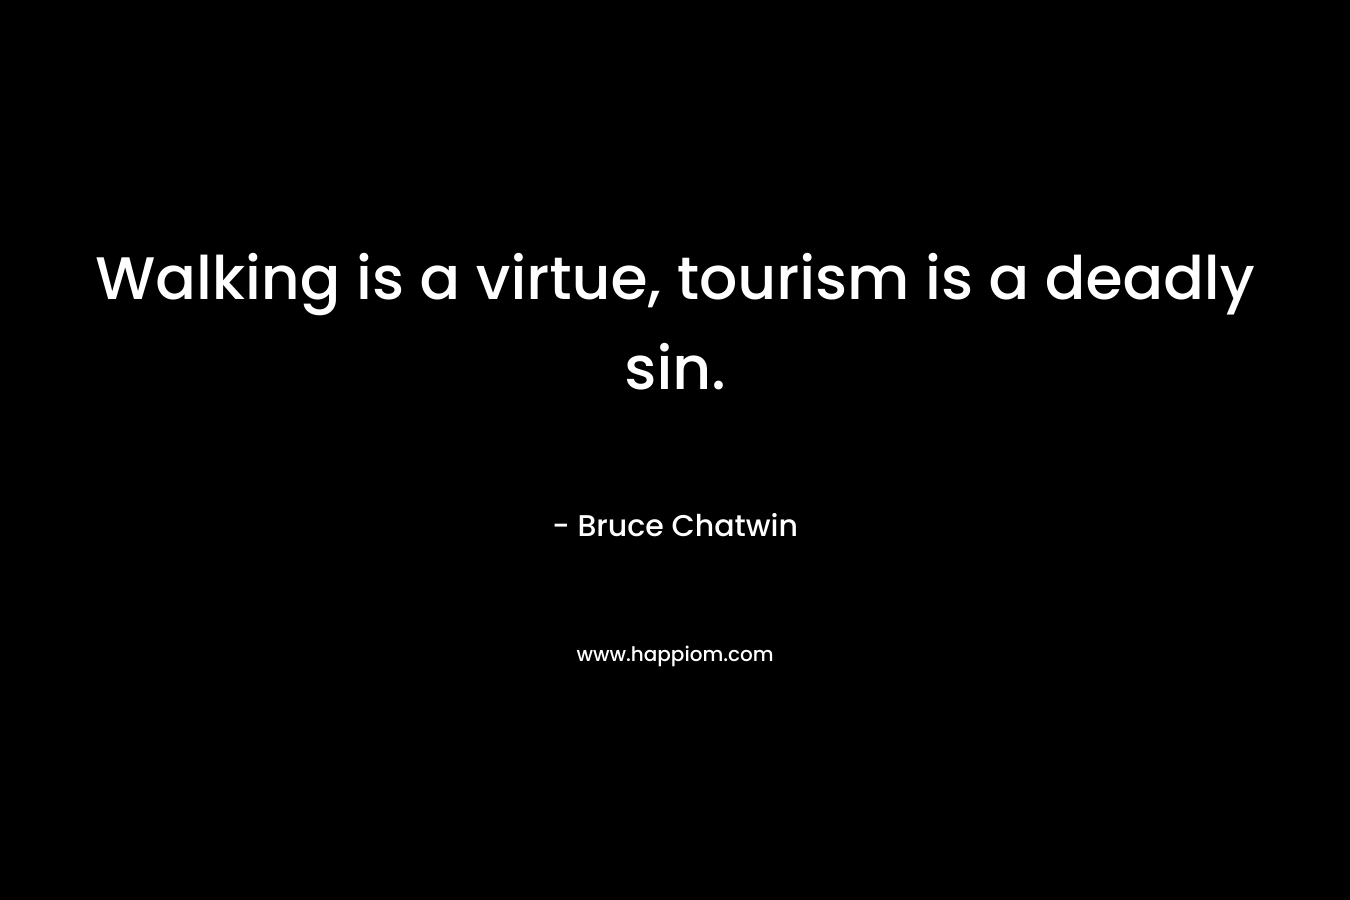 Walking is a virtue, tourism is a deadly sin.